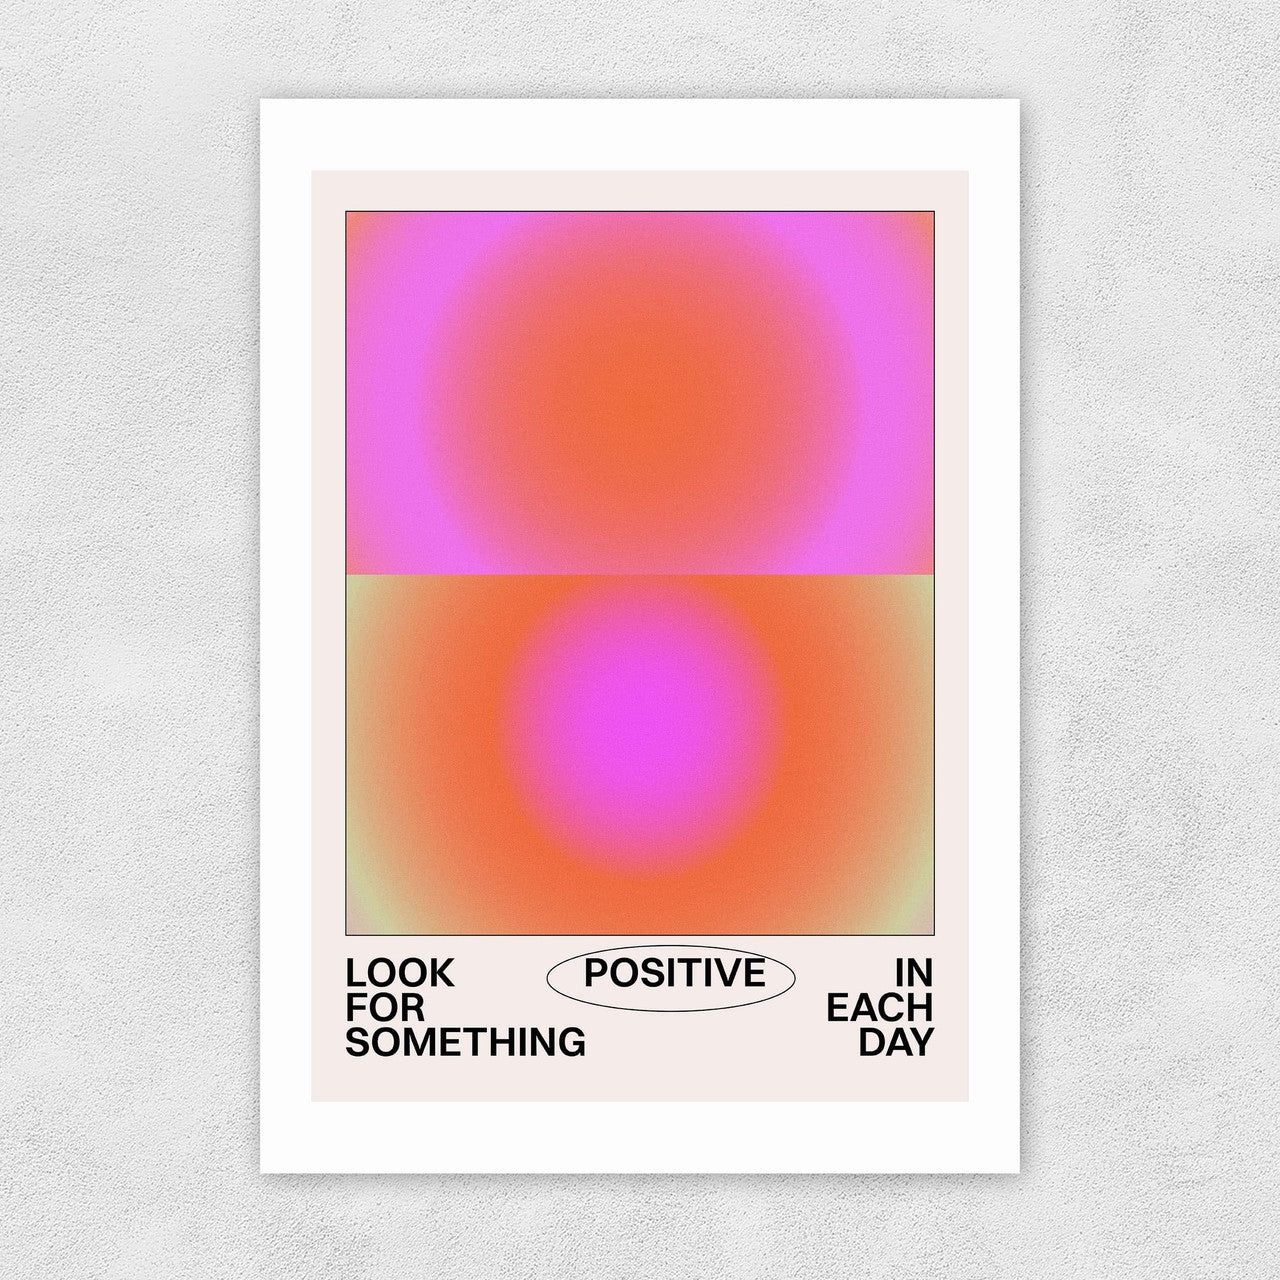 Look For Something Positive Print 30x40cm